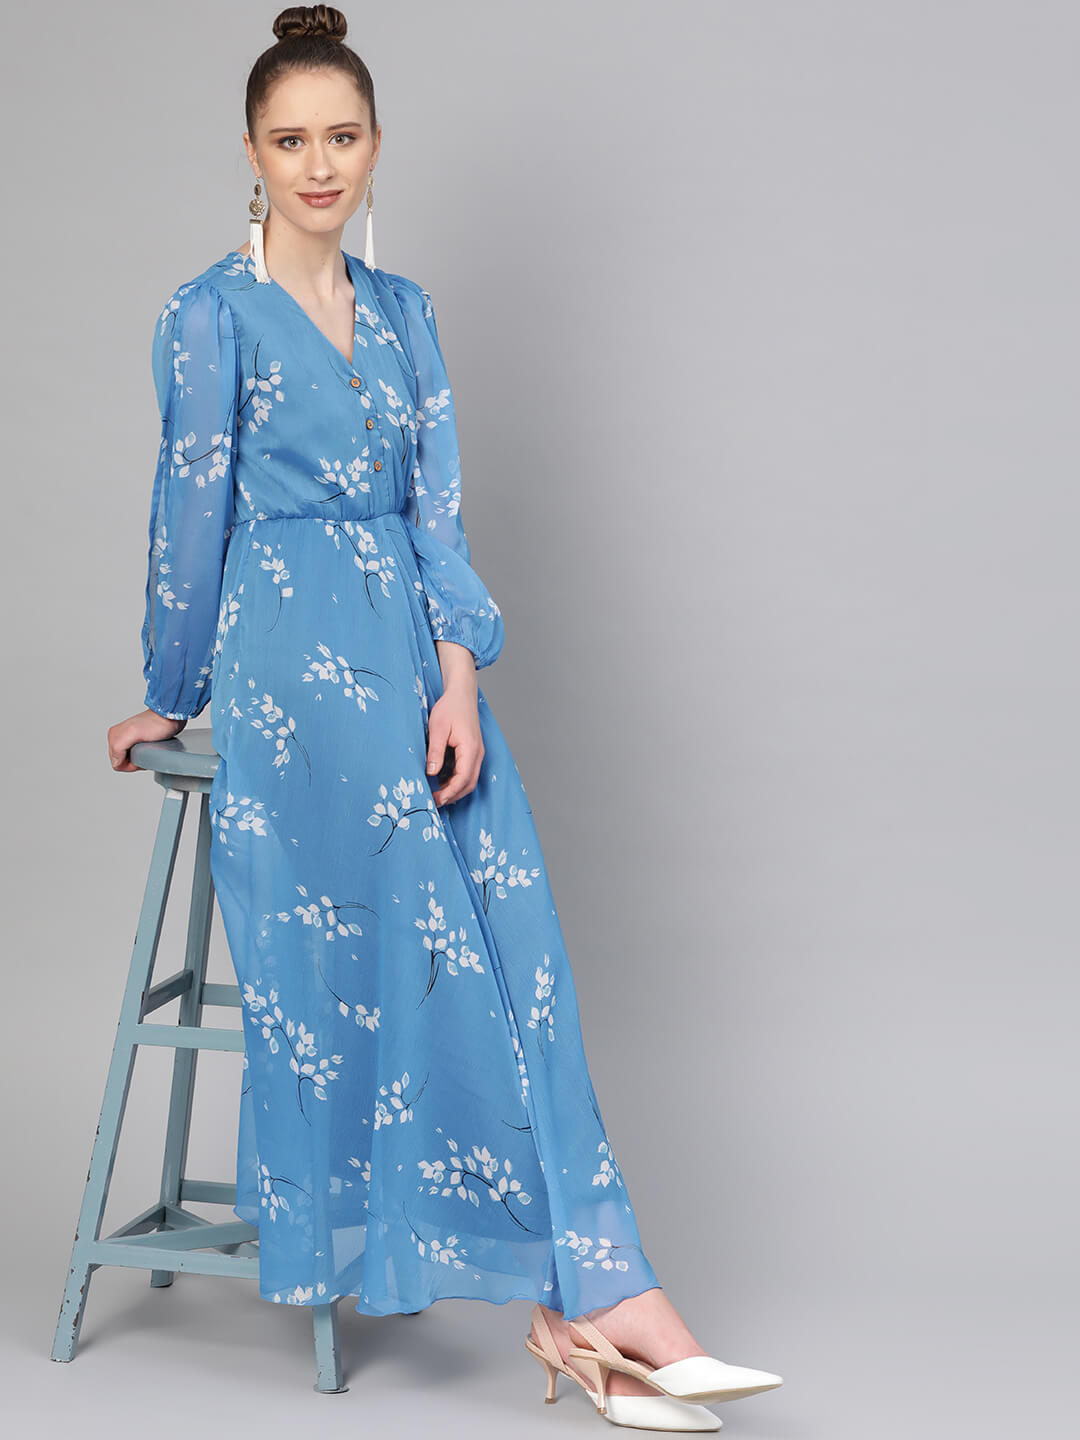 Blue Belted Flared Maxi Dress